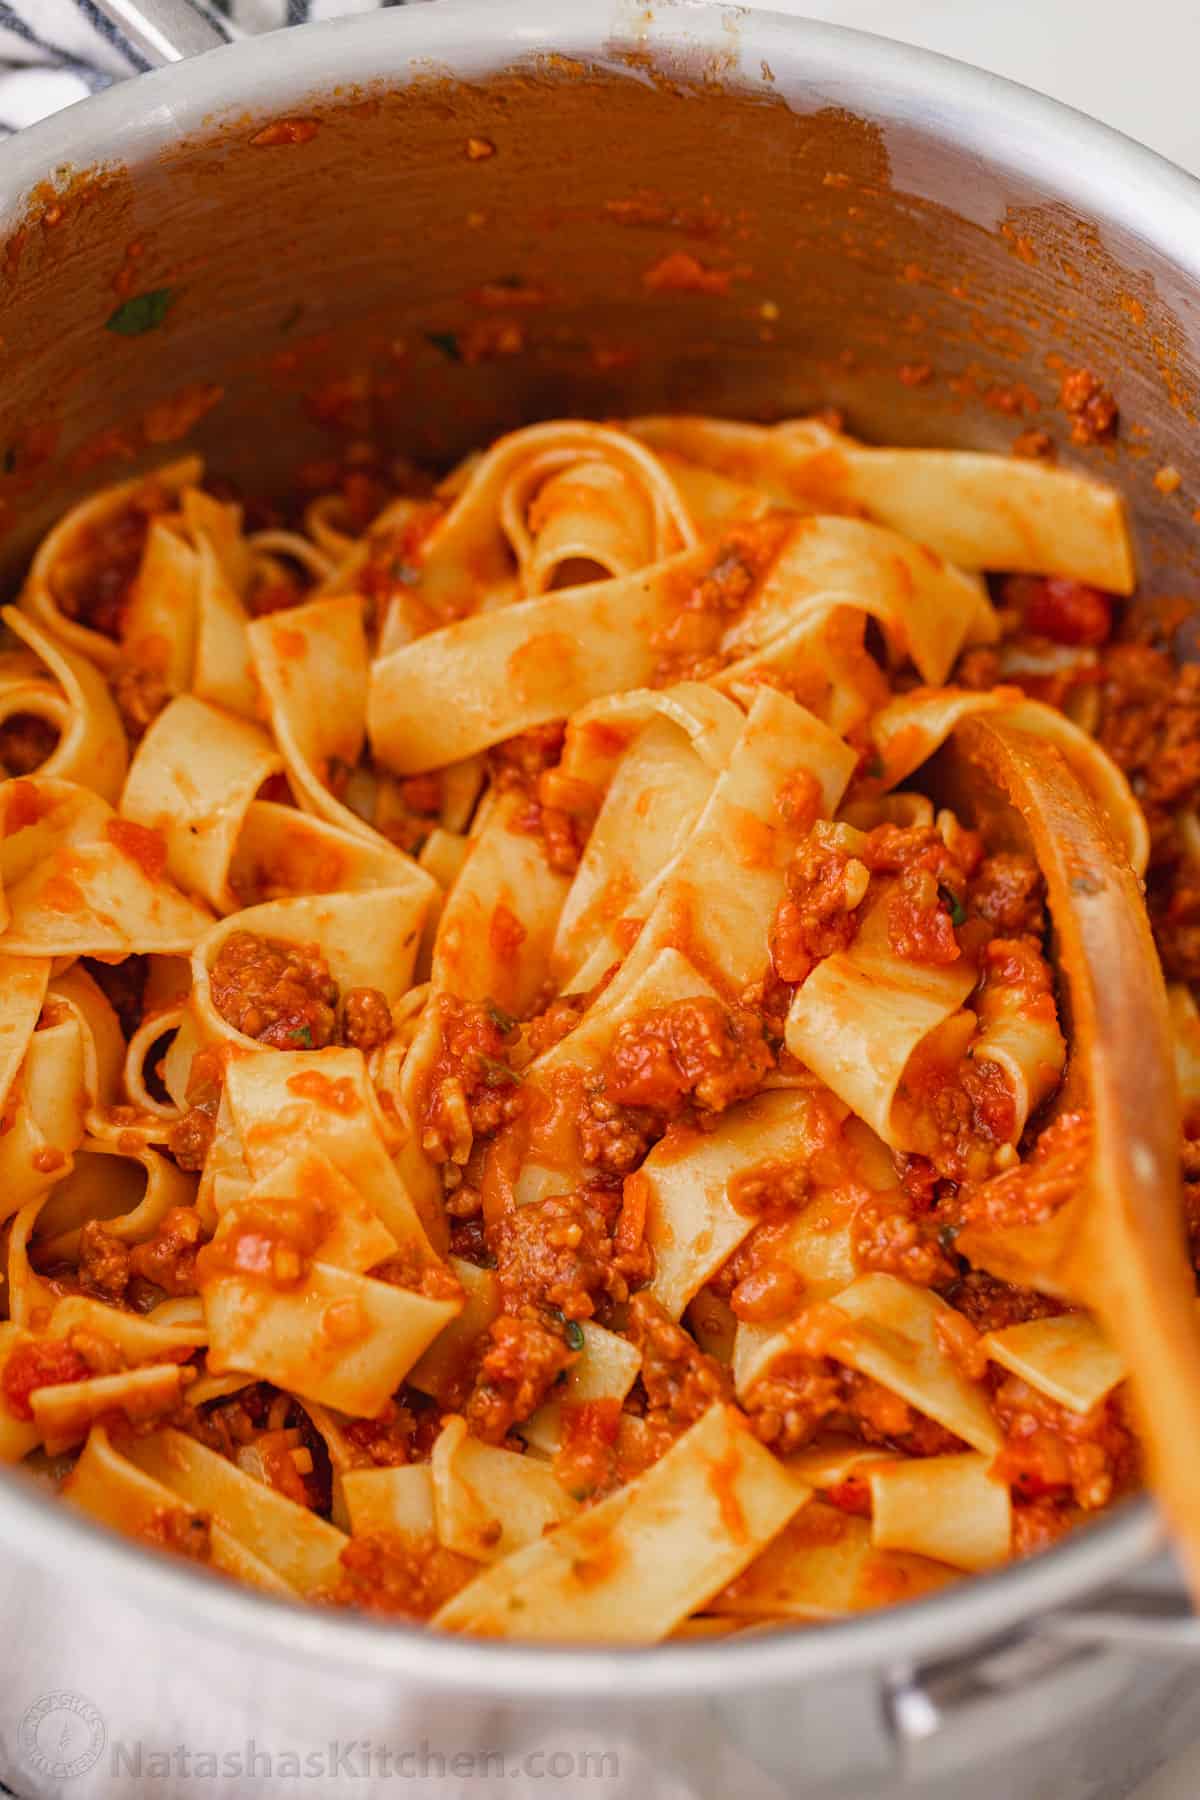 A large pot of pappardelle pasta bolognese, with a wooden spoon.